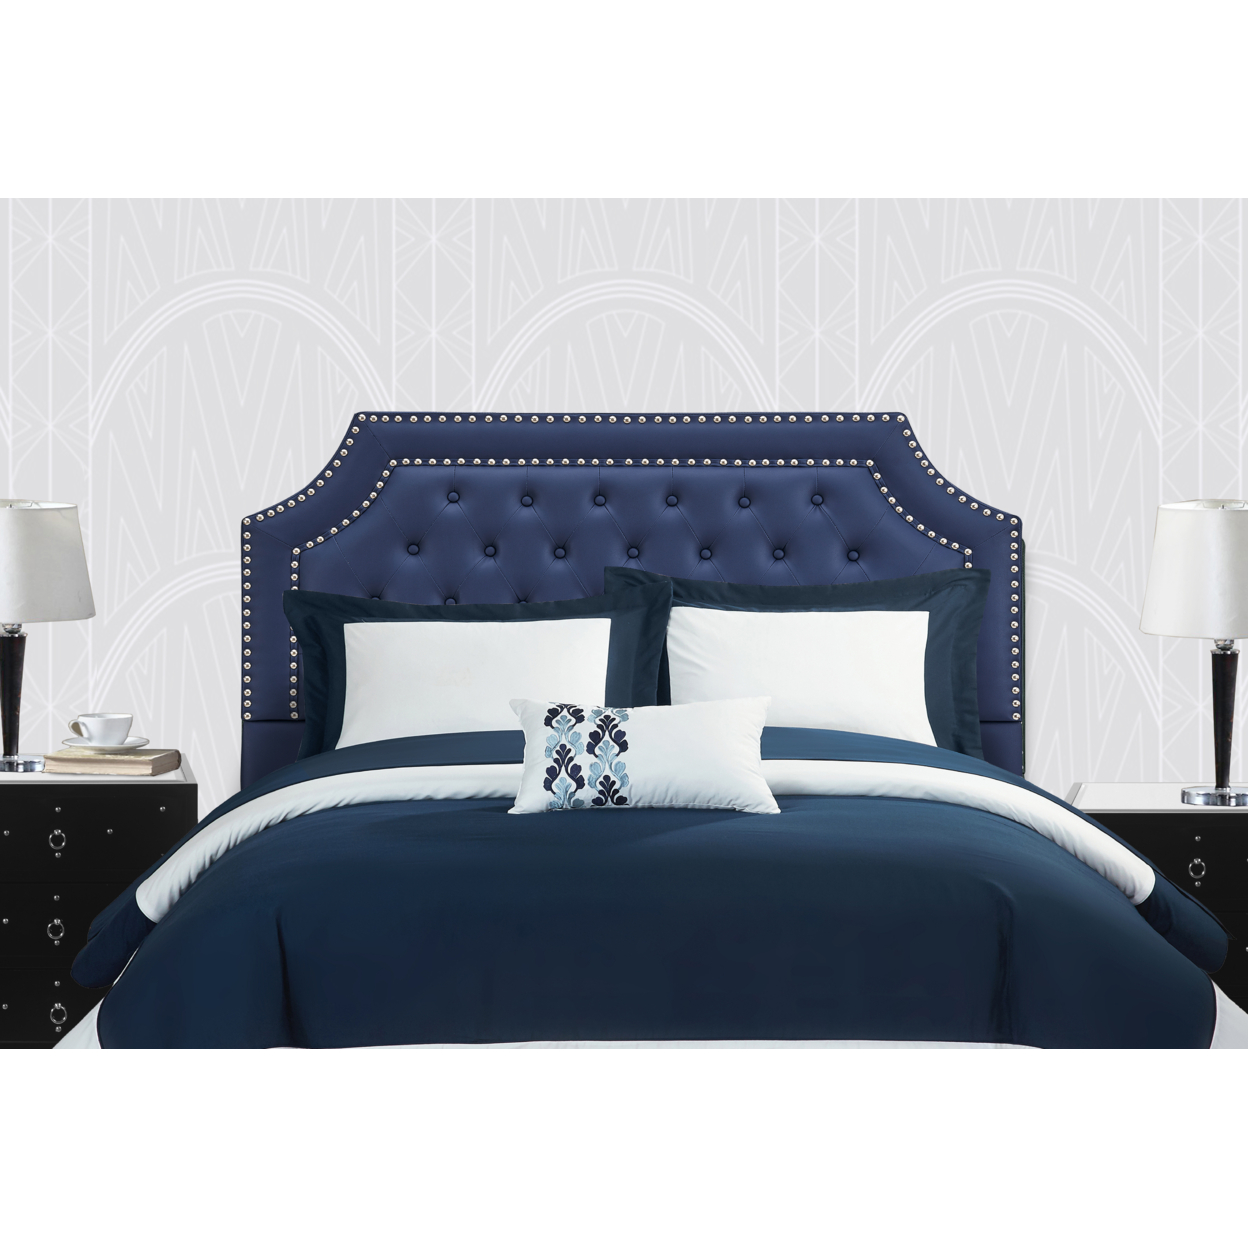 Chic Home Mahlon Headboard PU Leather Upholstered Button Tufted Double Row Silver Nailhead Trim - Navy, Queen